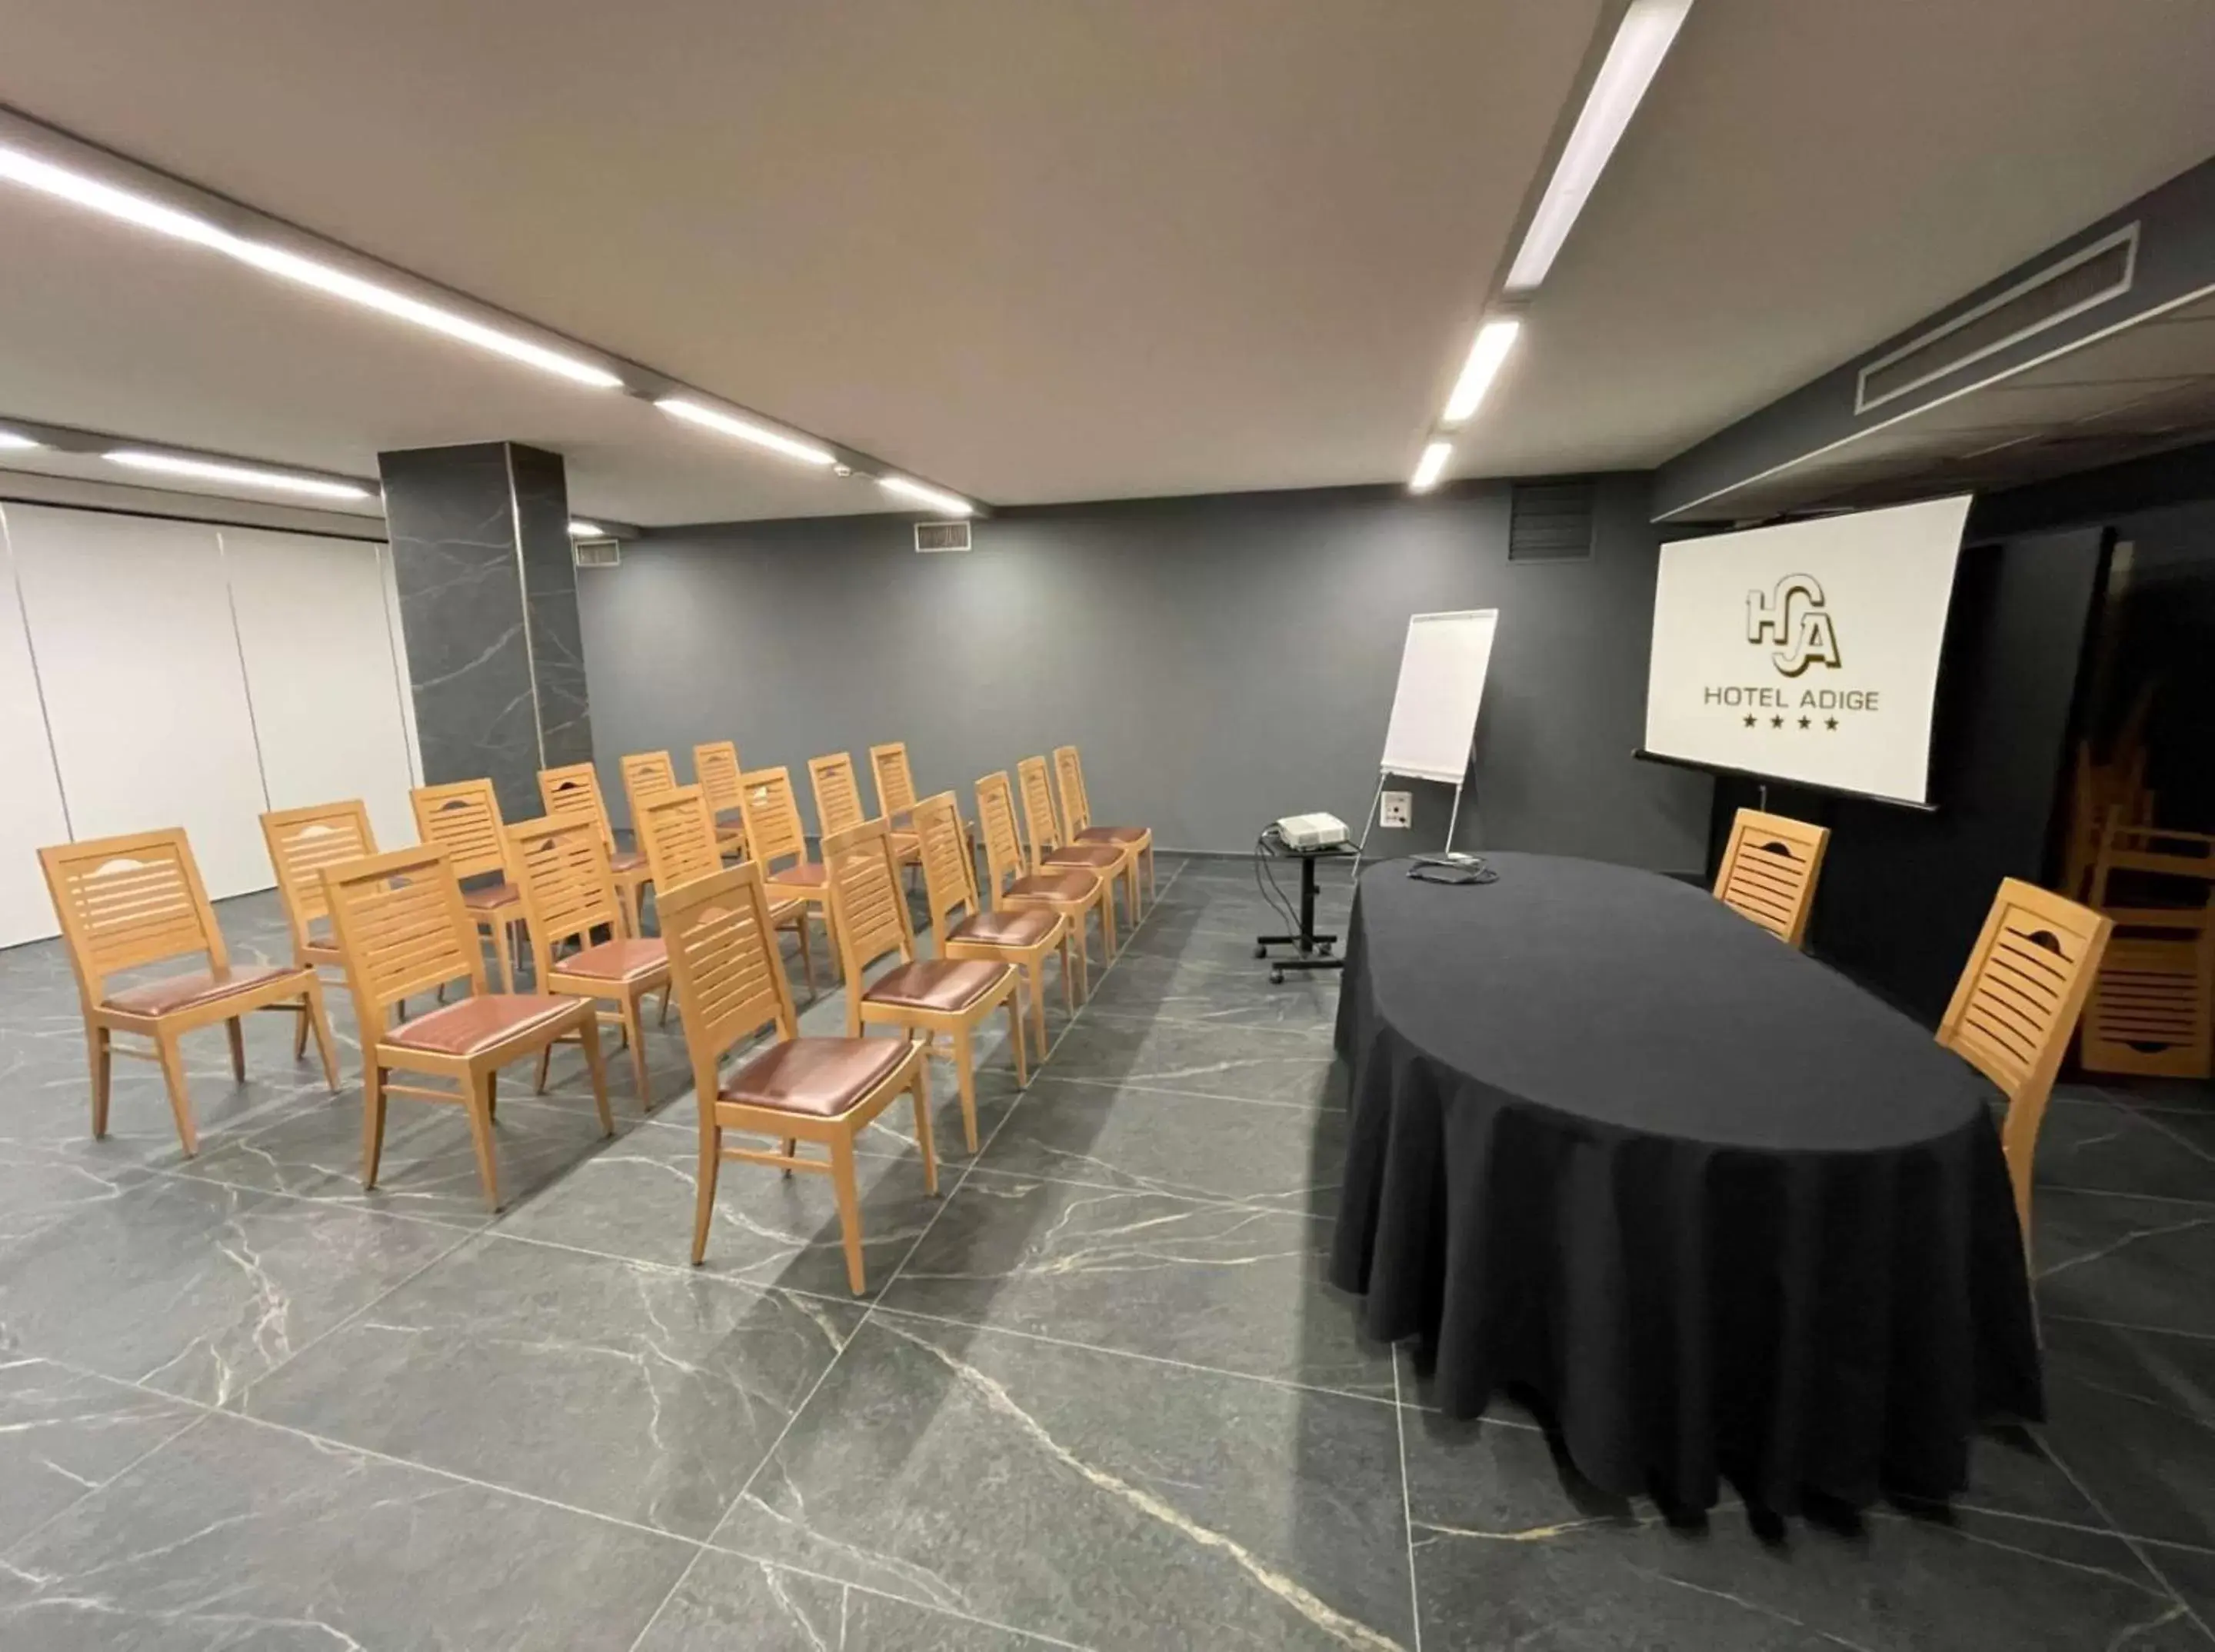 Meeting/conference room, Business Area/Conference Room in Best Western Hotel Adige